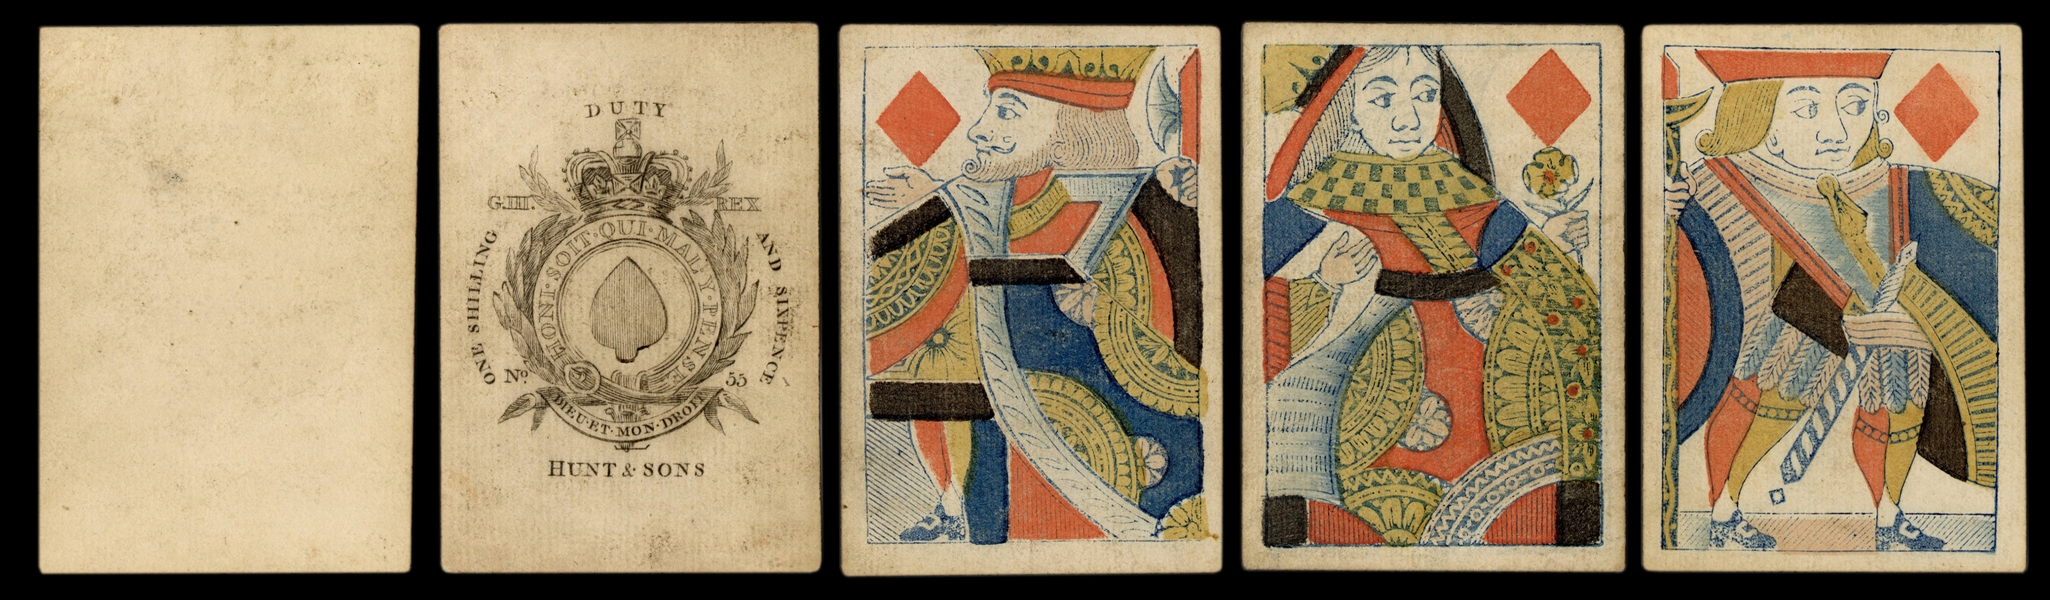  Hunt & Sons Playing Cards. English, ca. 1840. George III Ac...